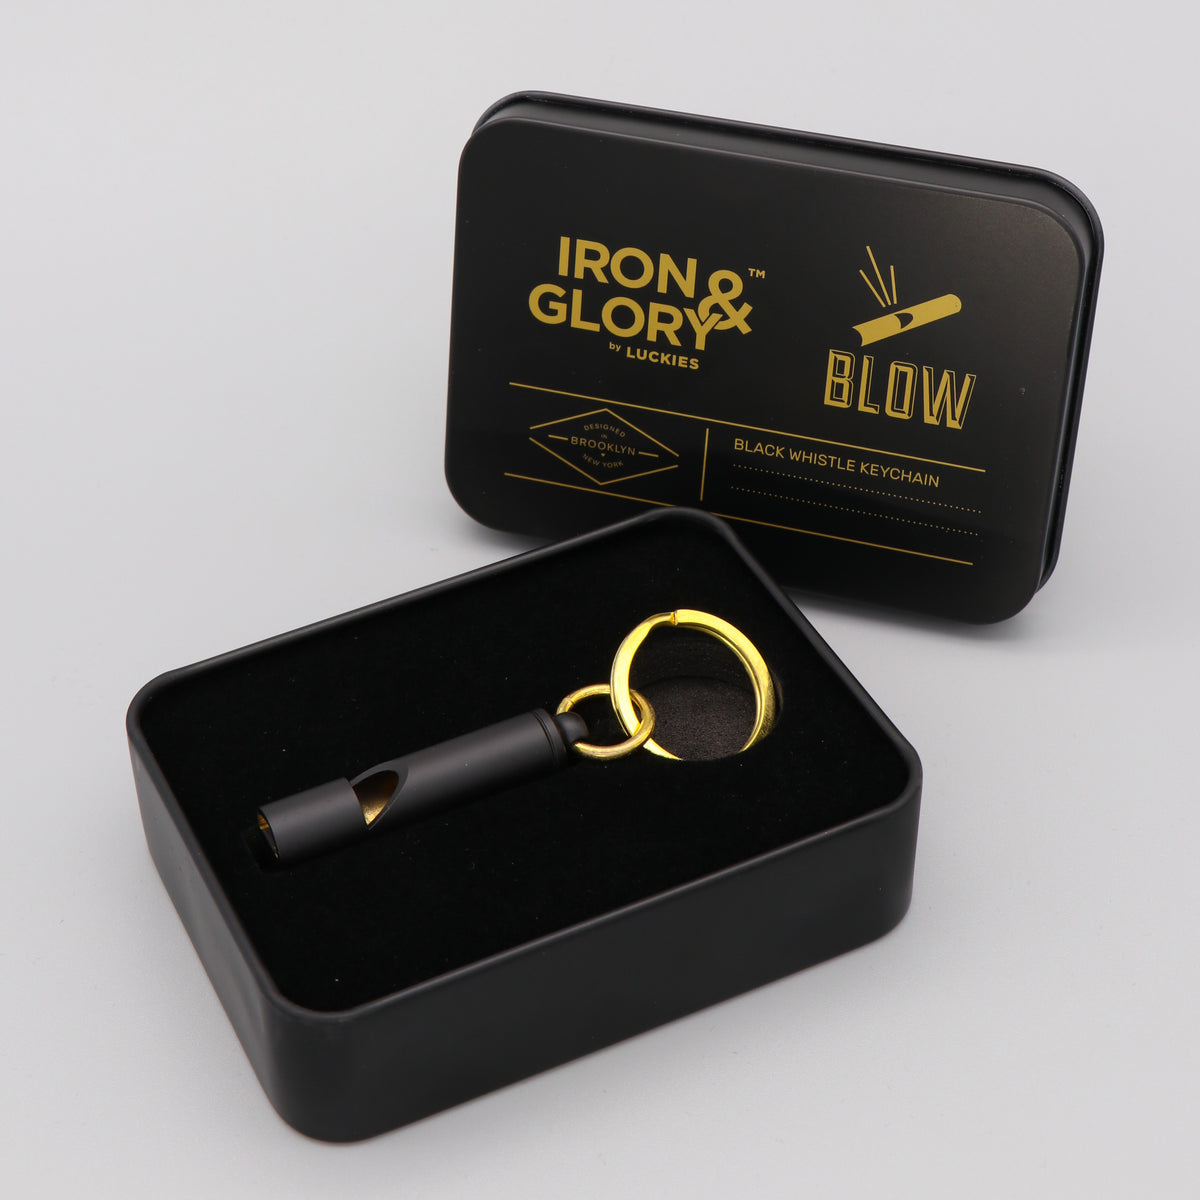 Whistle Keychain 'Blow' Iron and Glory Black Iron & Glory at an affordable  price with outstanding service to all our customers